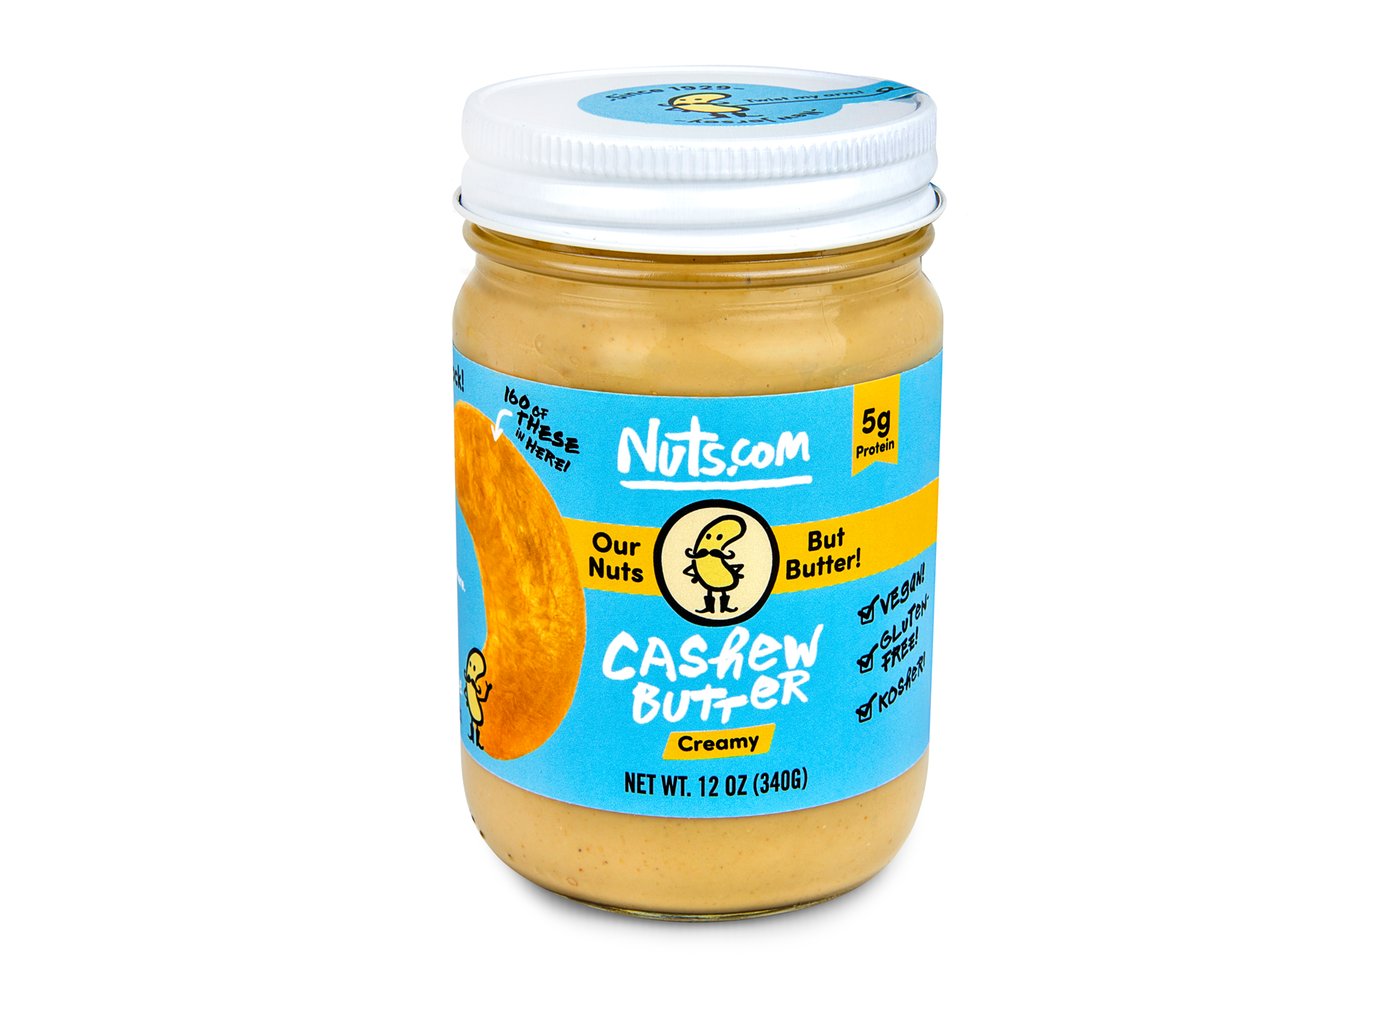 Cashew Butter (Oil Roasted, Smooth) image zoom